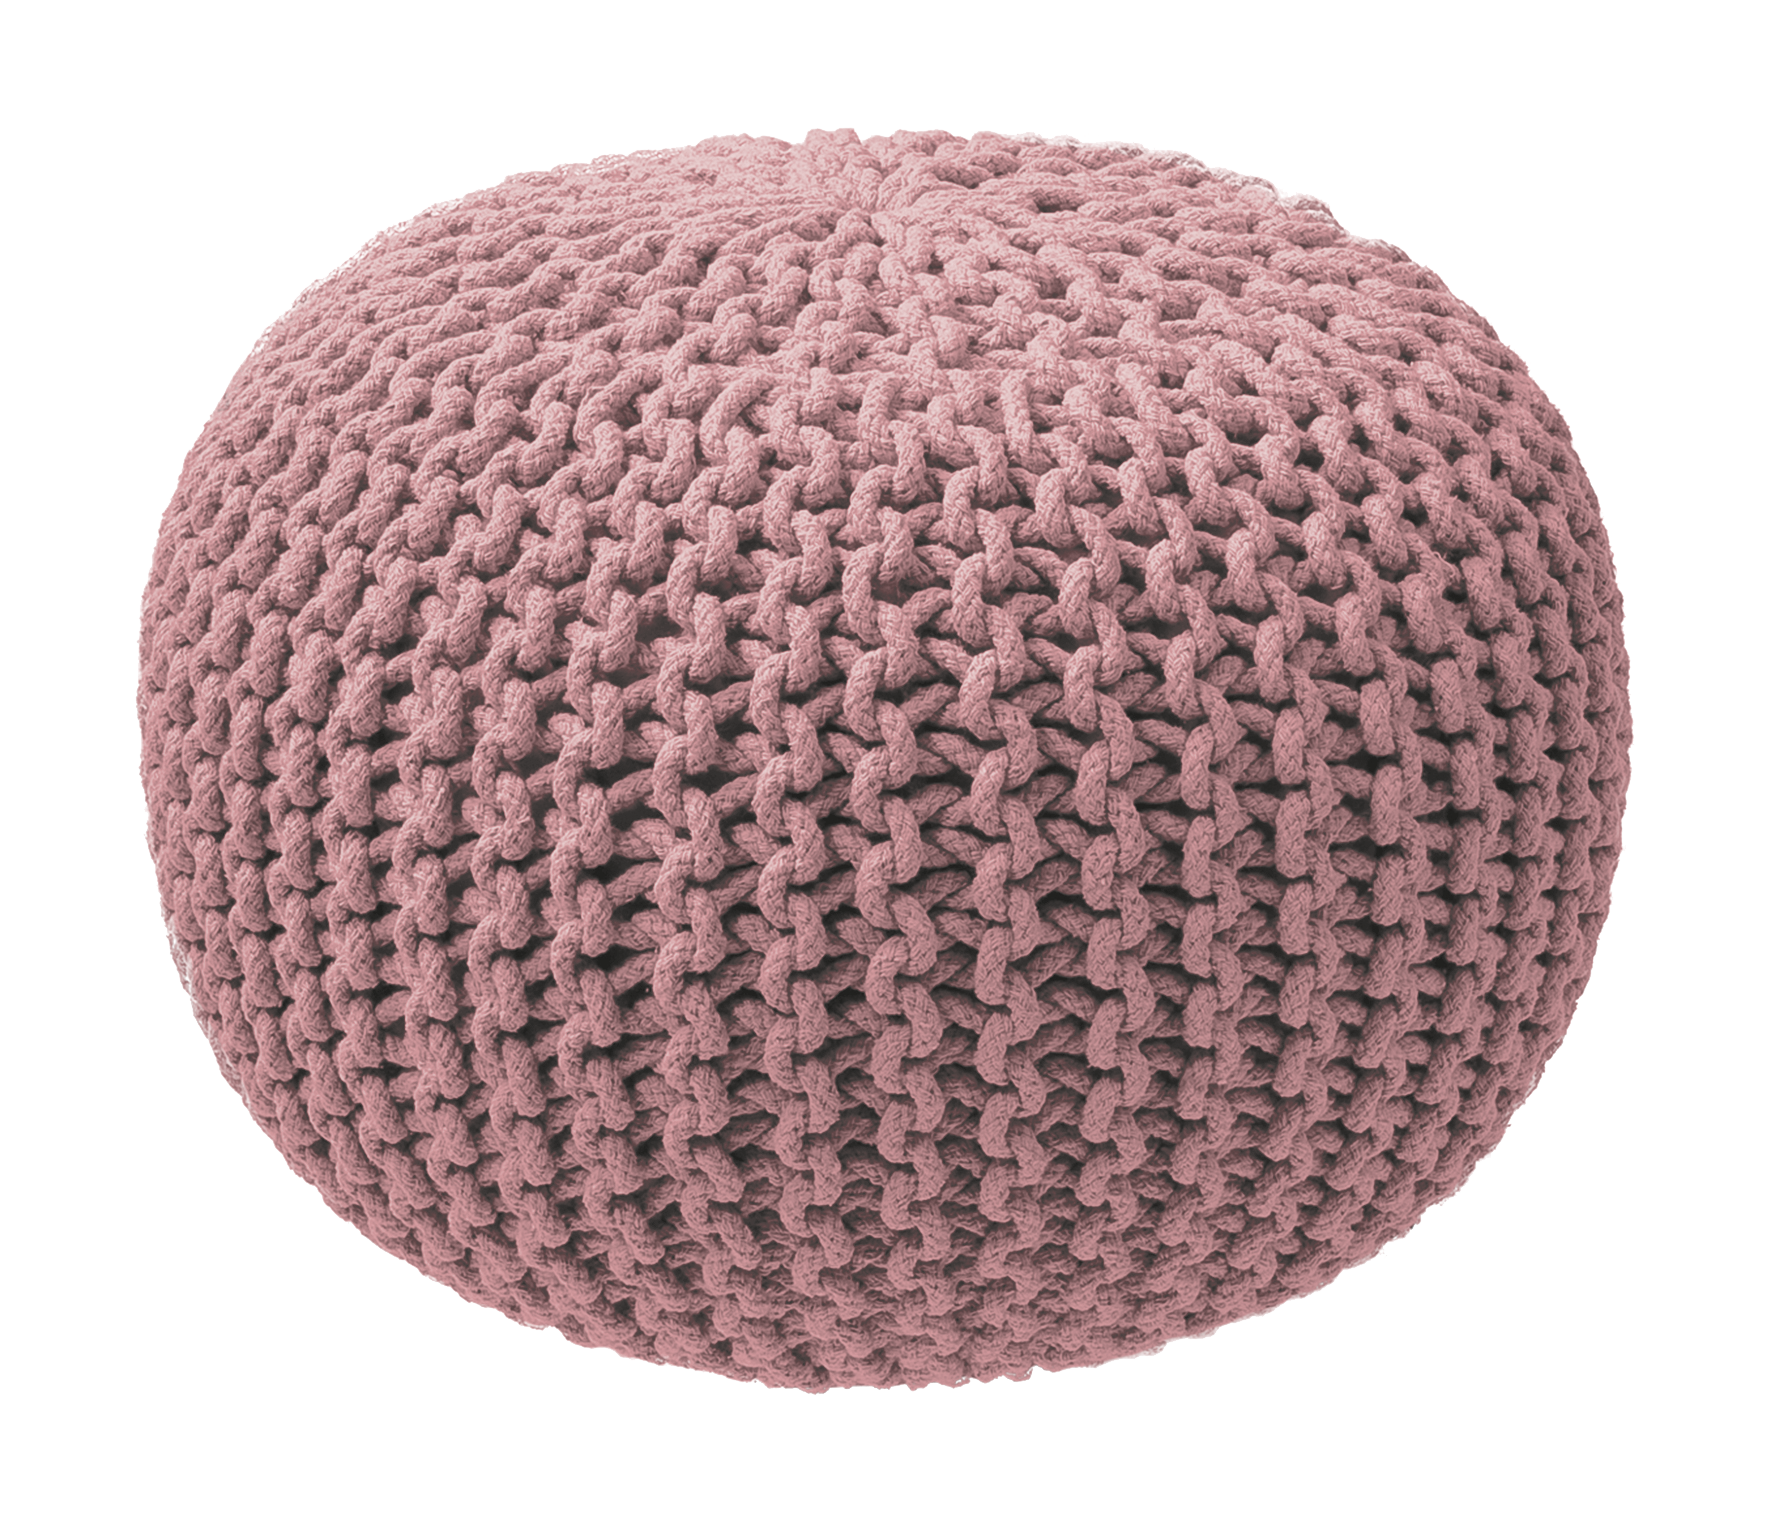 Knitted Pouf soft pink